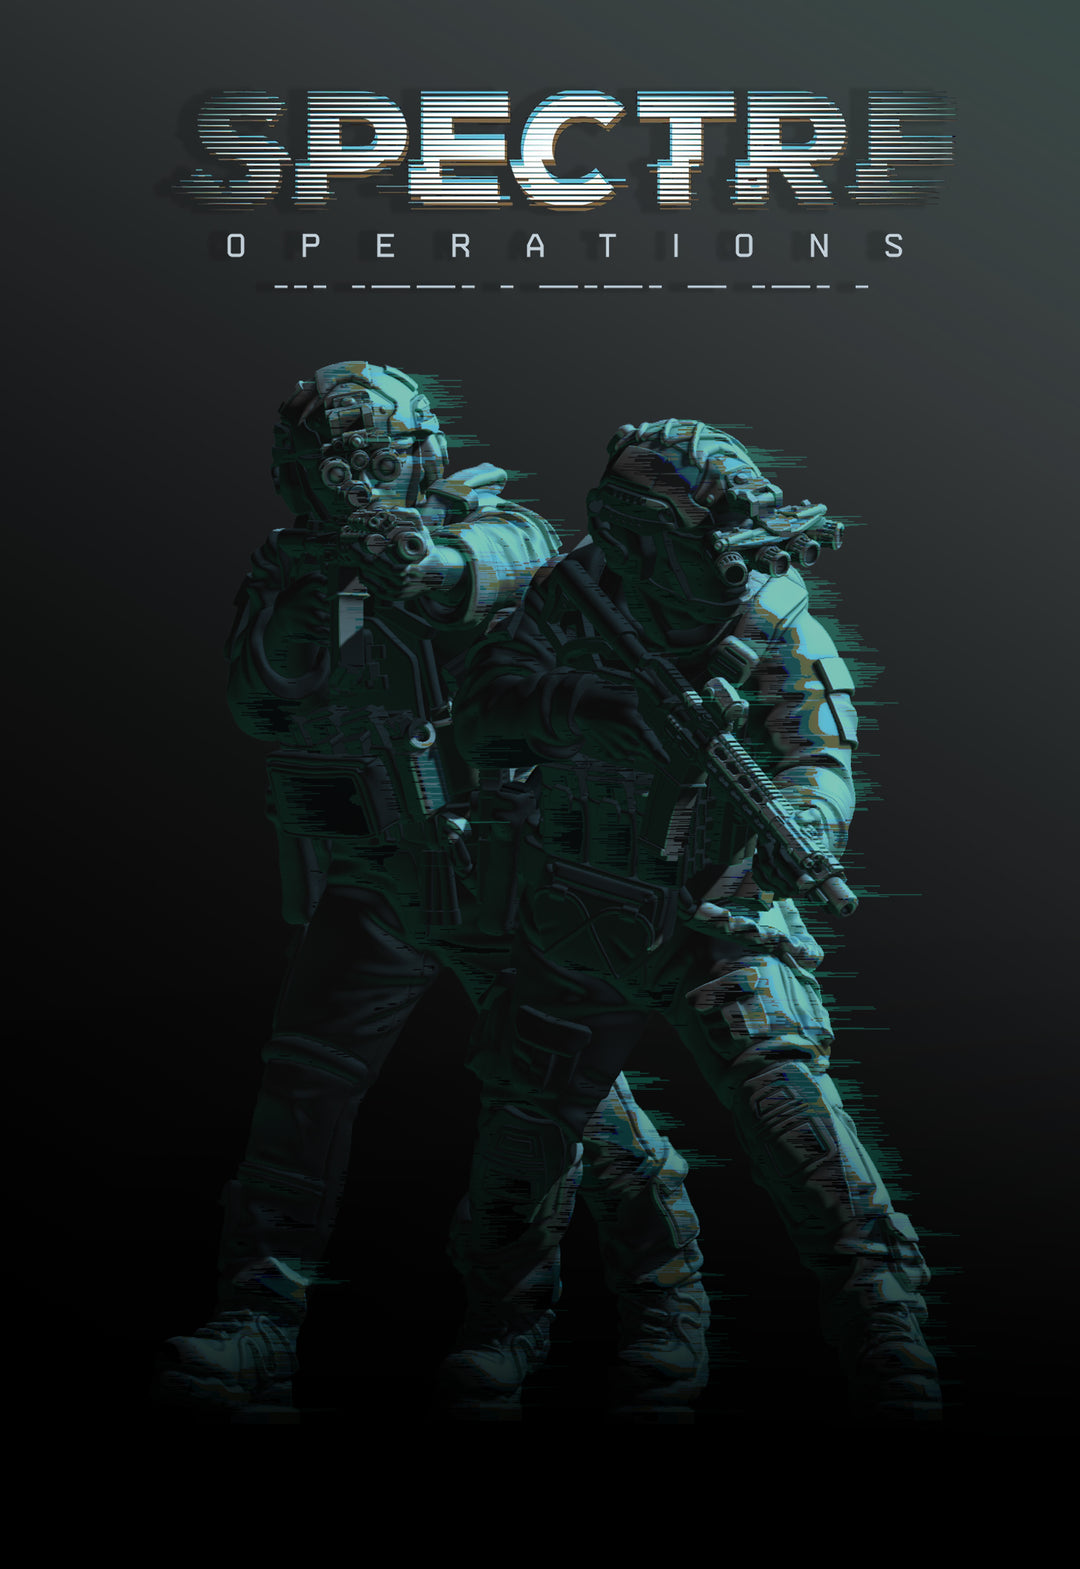 Spectre: Operations